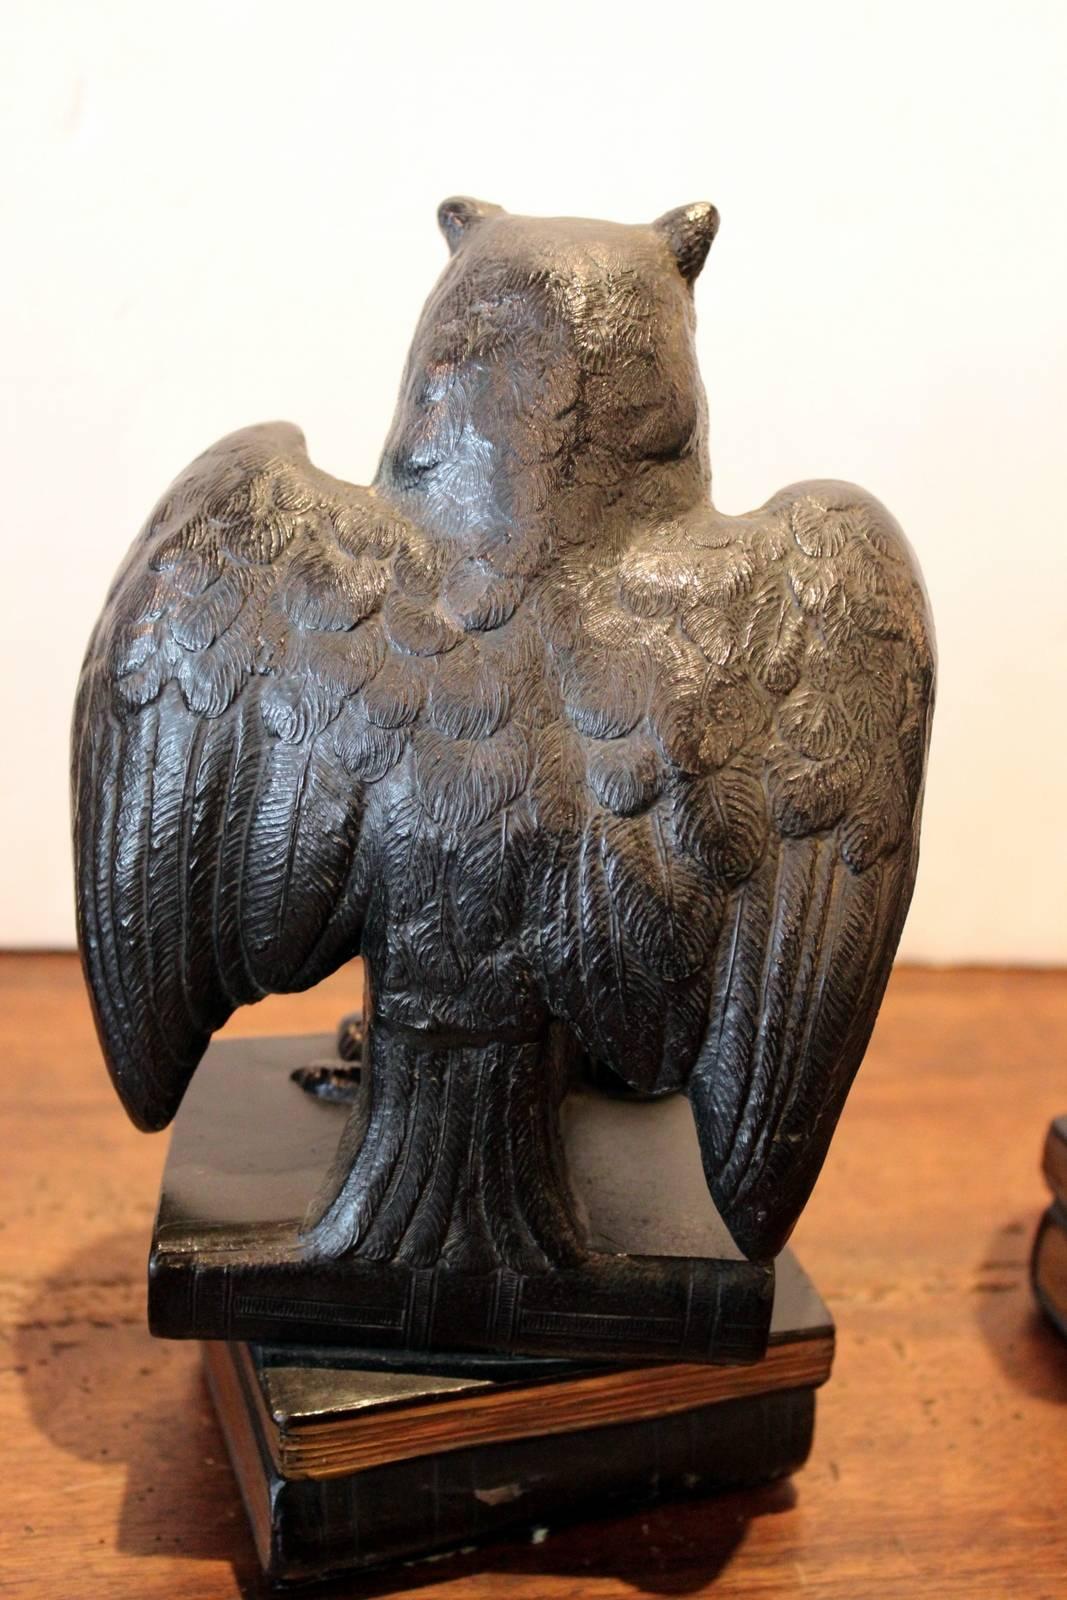 American Pair of Bronze Finish Owl Bookends with Glass Eyes, circa 1920